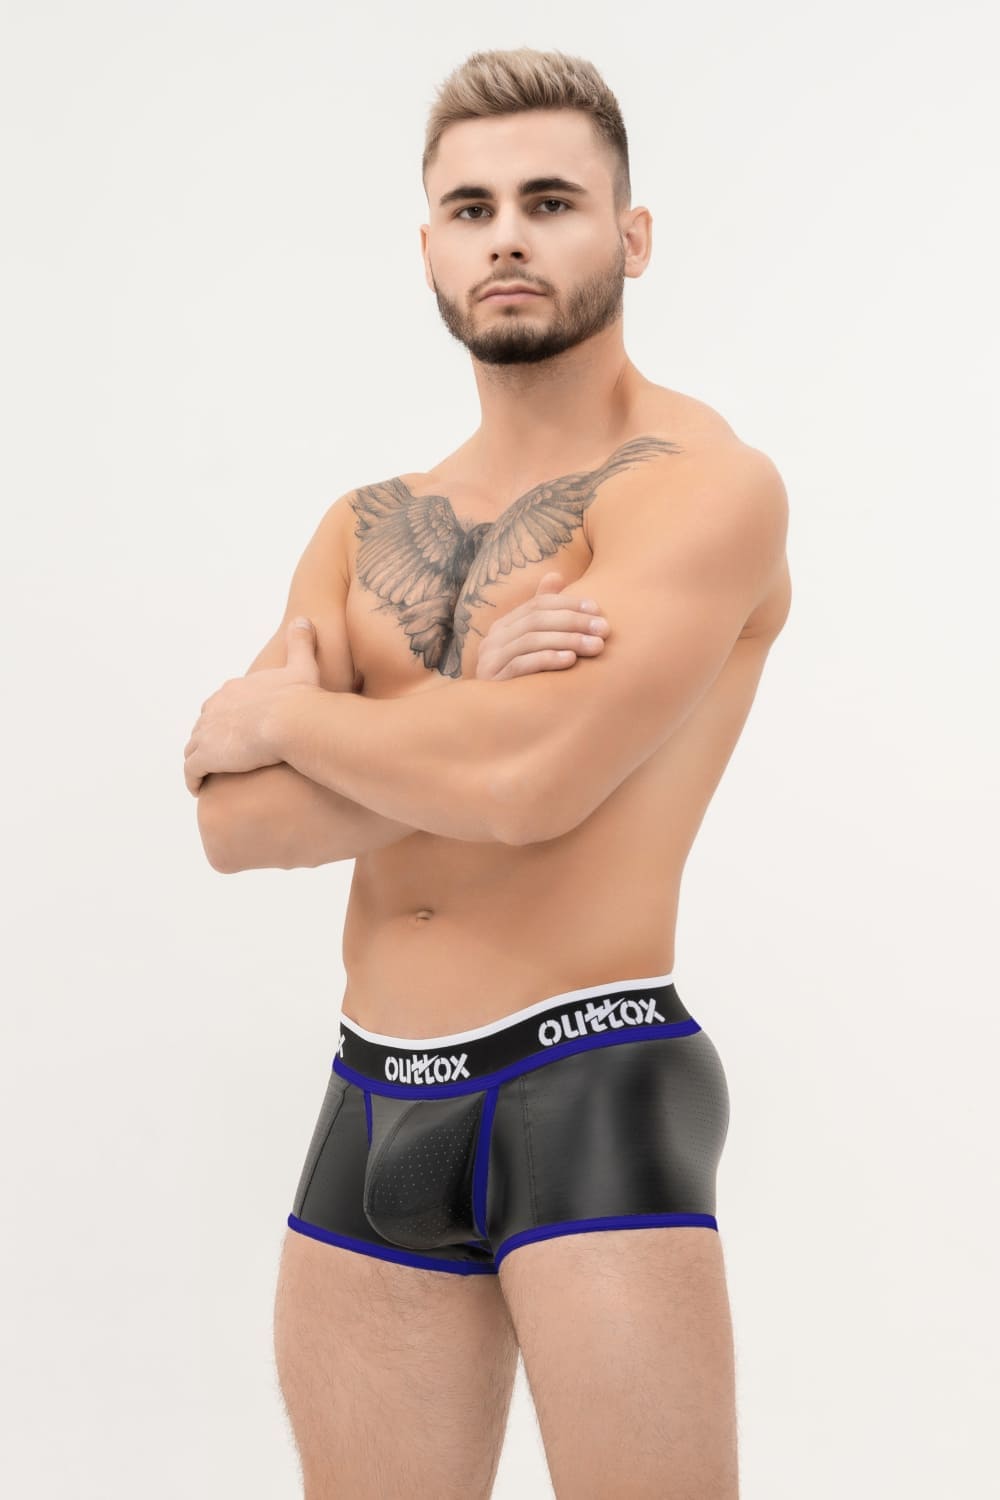 Outtox. Wrapped Rear Trunk Shorts with Snap Codpiece. Black+Blue &